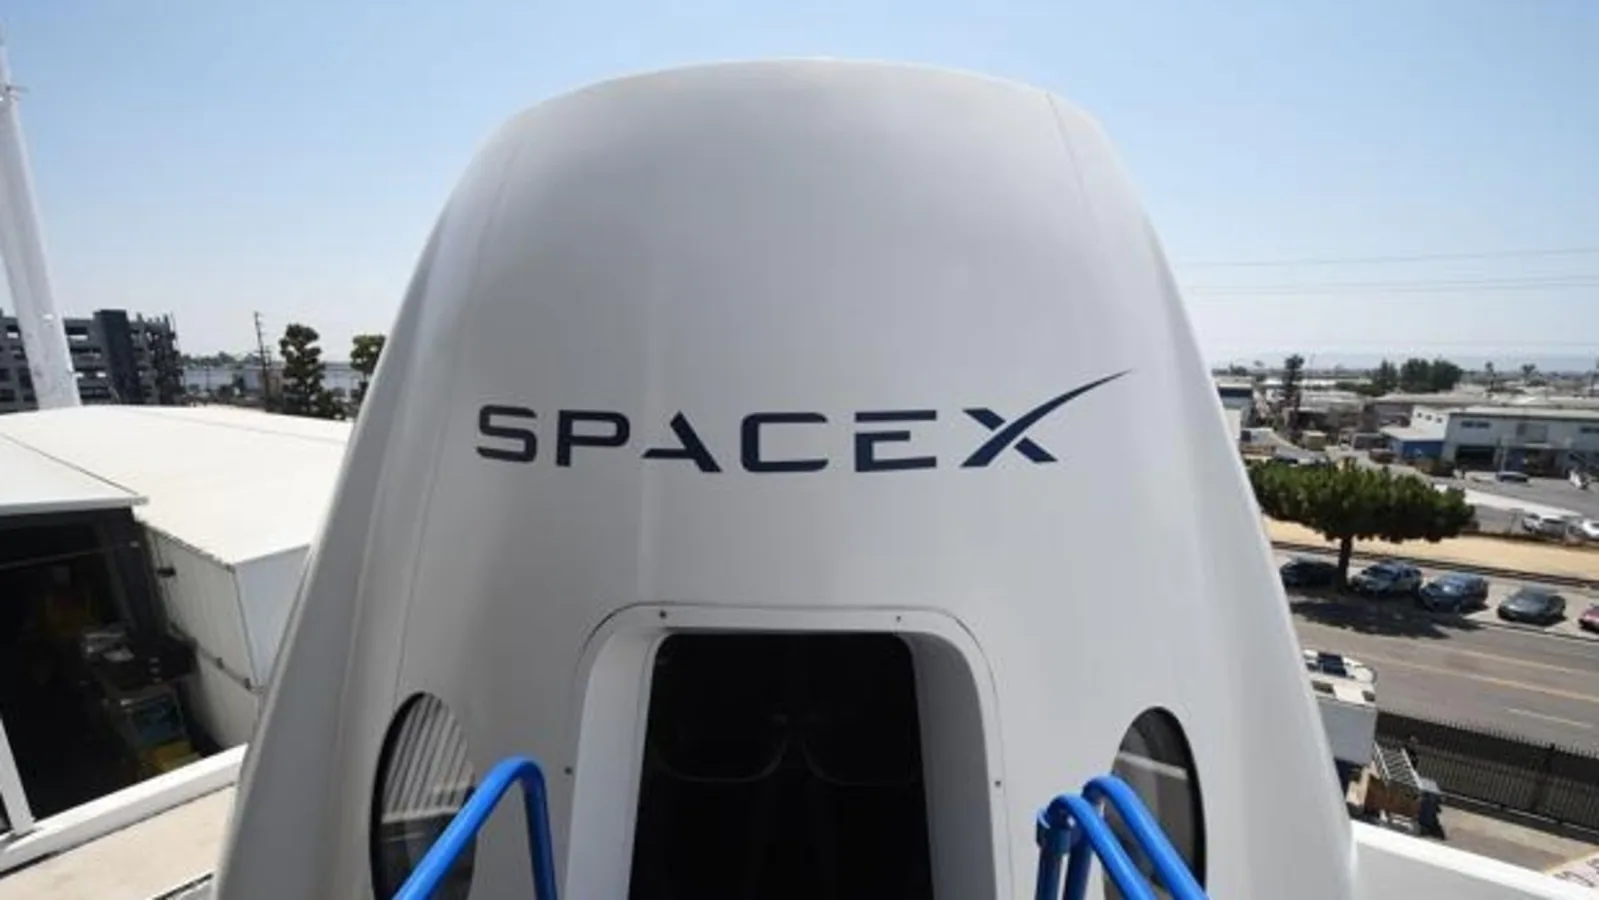 SpaceX raises $1.68 billion, under its targeted financing goal